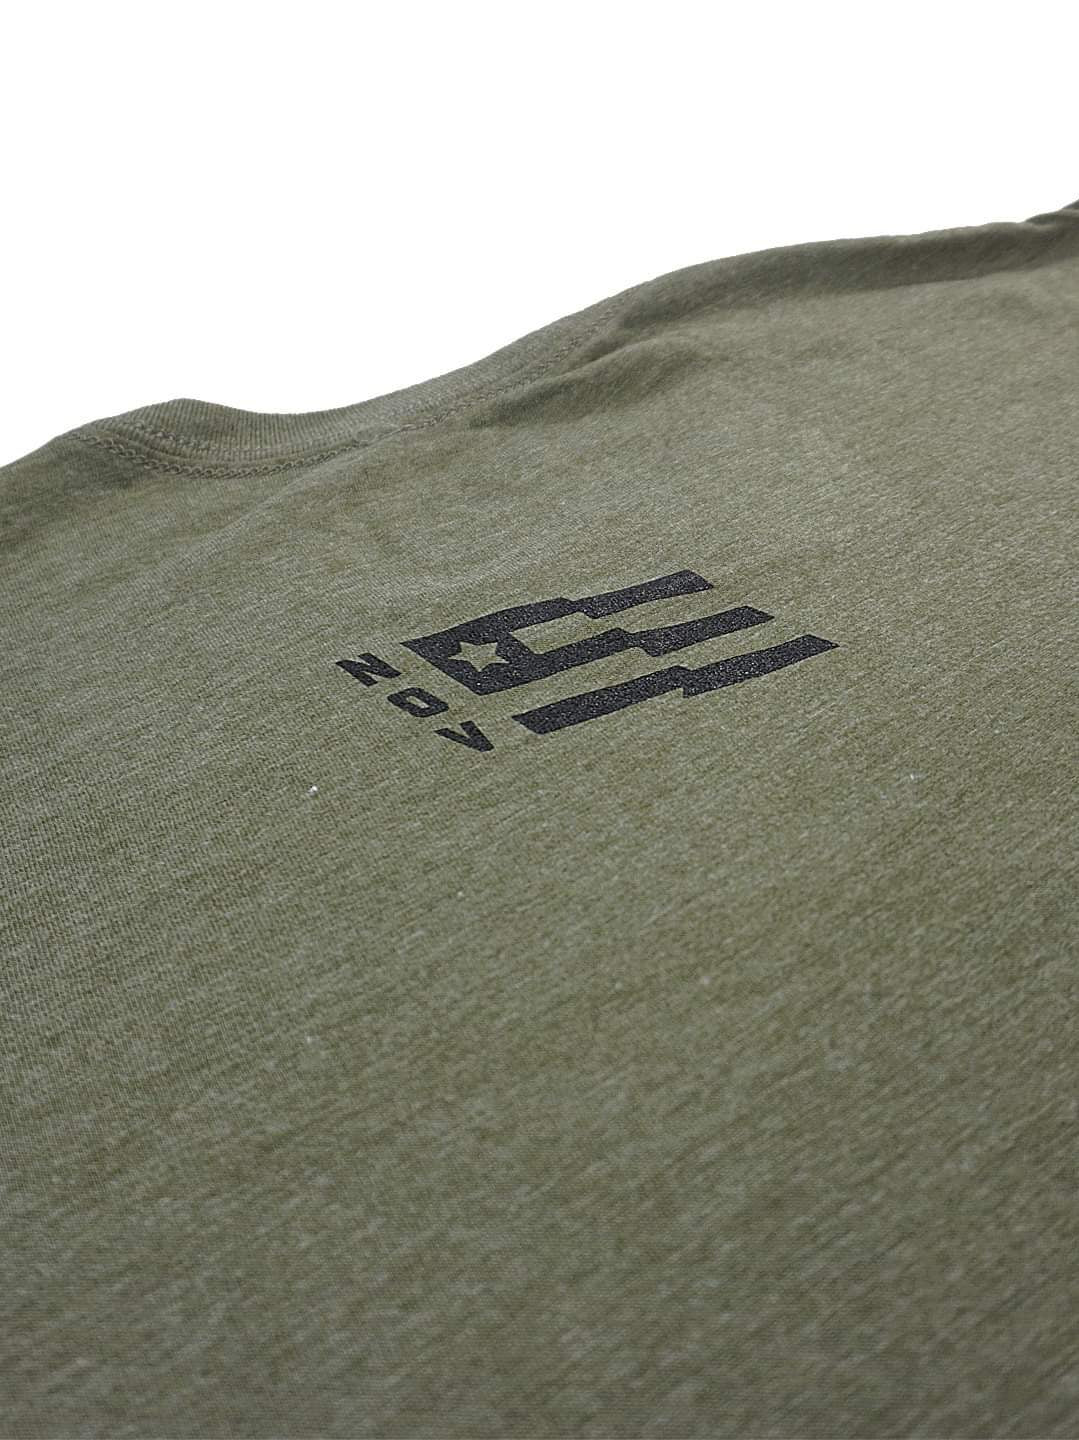 Limited Edition - Live Free Shirt - Army Green